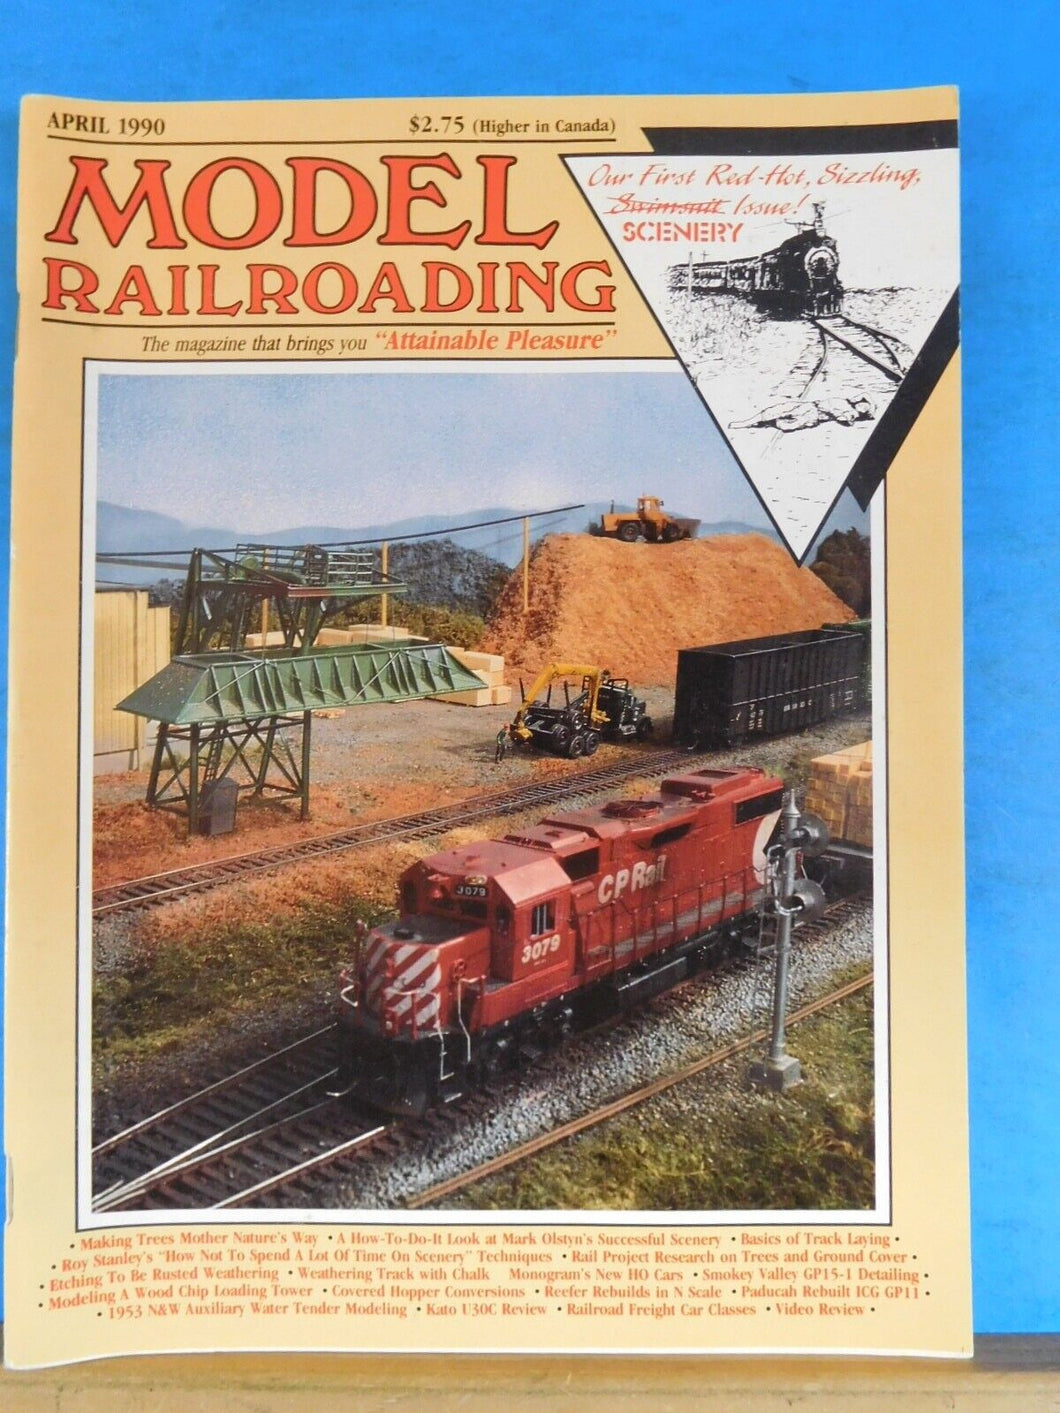 Model Railroading 1990 April Scenery Issue Trees Track laying Etching to be rust